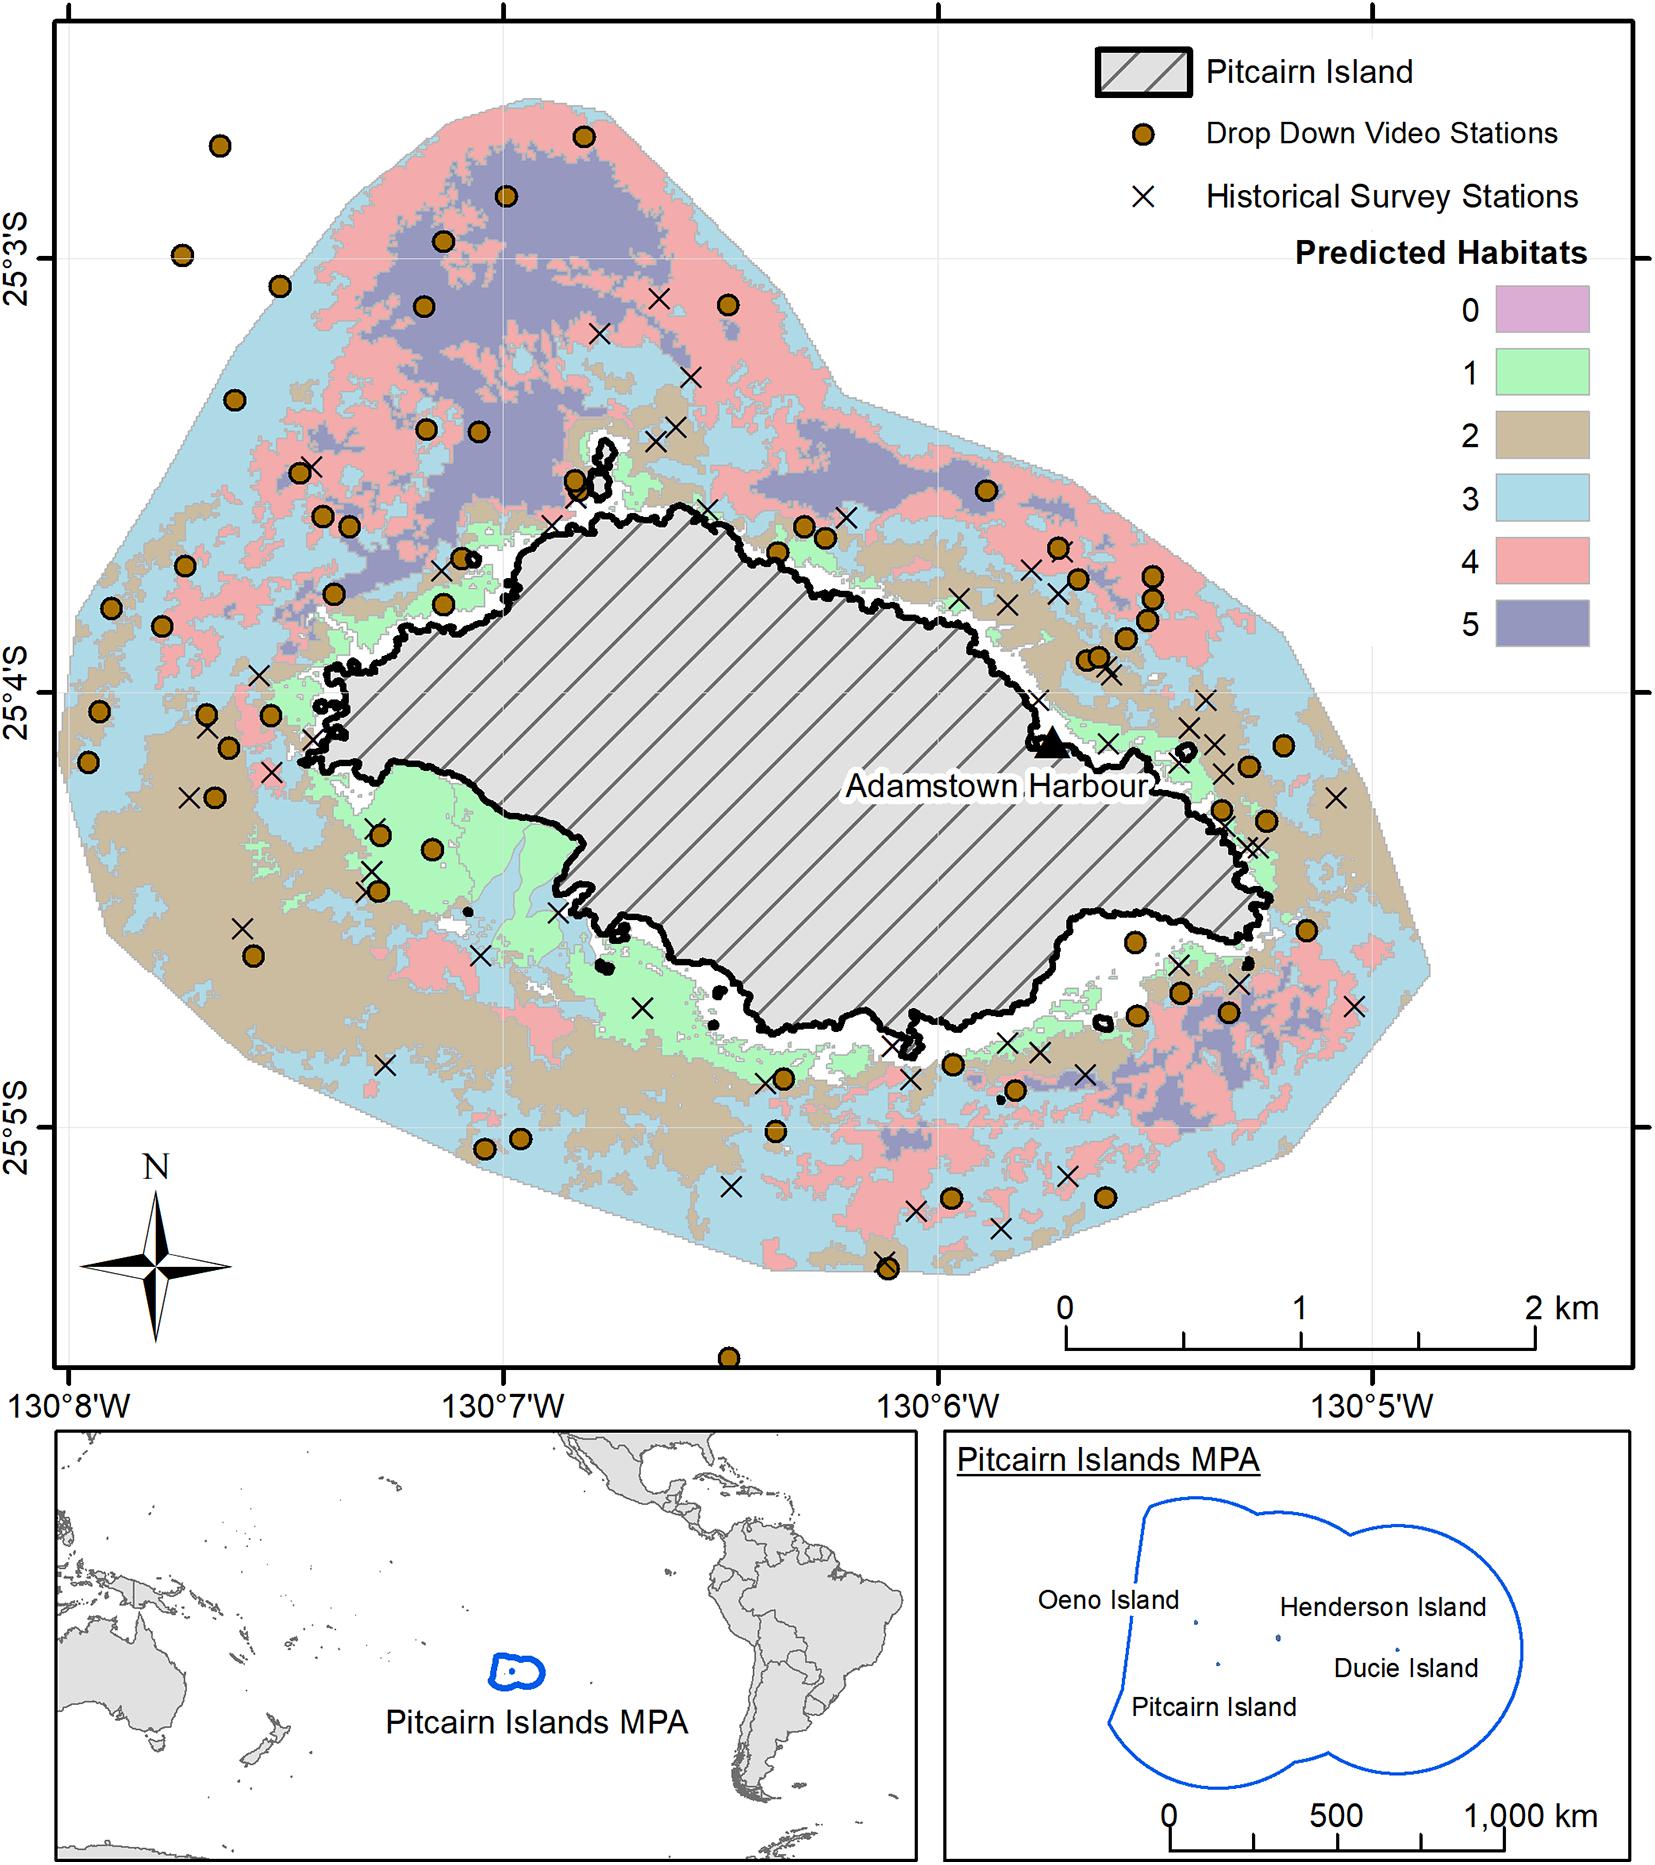 Frontiers Rapid Assessment Of Seabed Habitats Around Pitcairn Island In Aid Of Activity Management During The Covid 19 Global Pandemic Marine Science